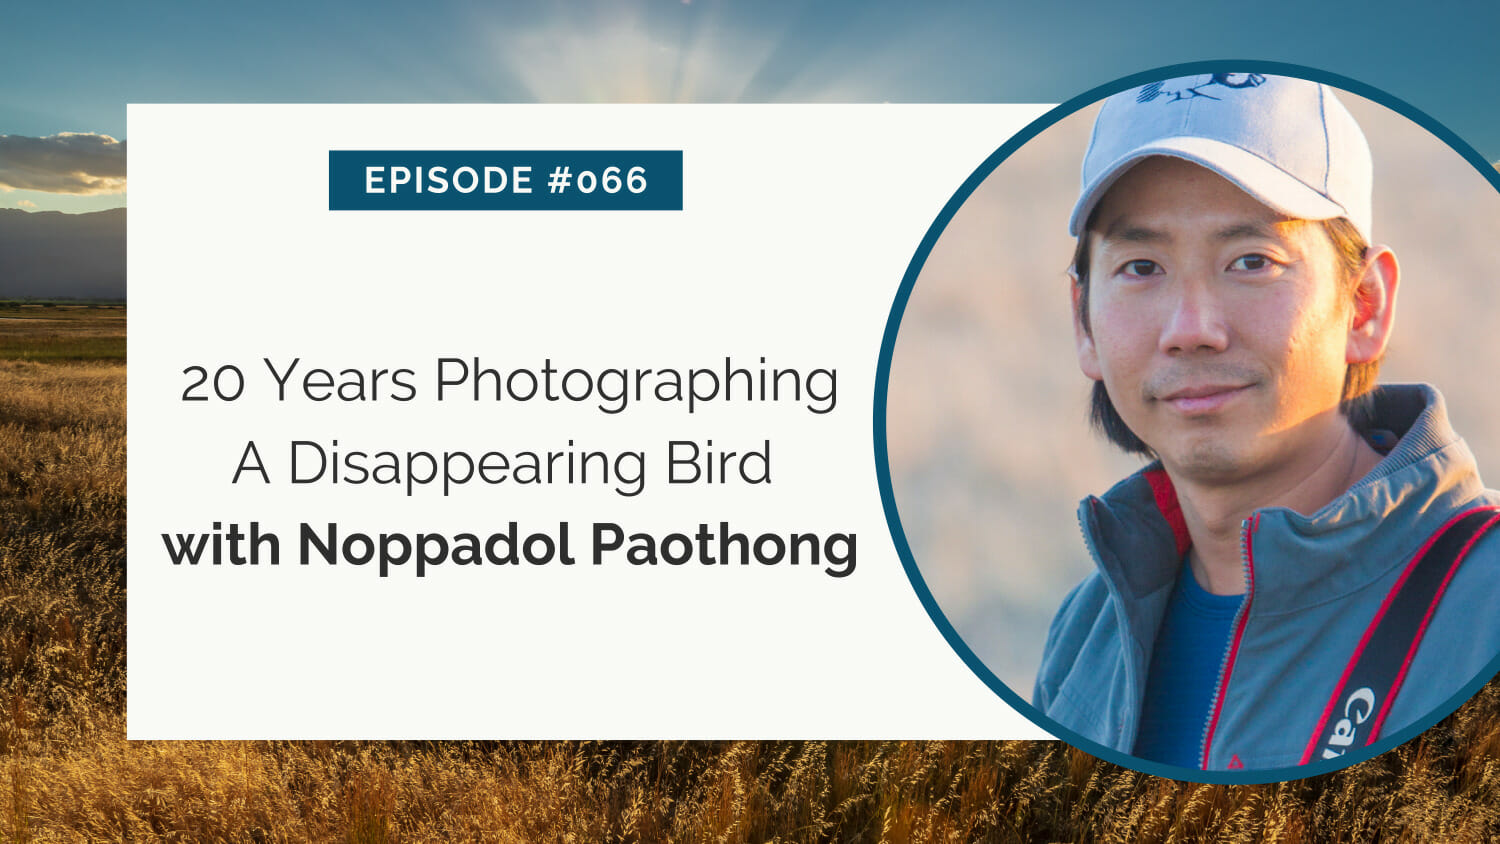 Portrait of noppadol paothong featured in a promotional graphic for an episode discussing 20 years of photographing a disappearing bird.